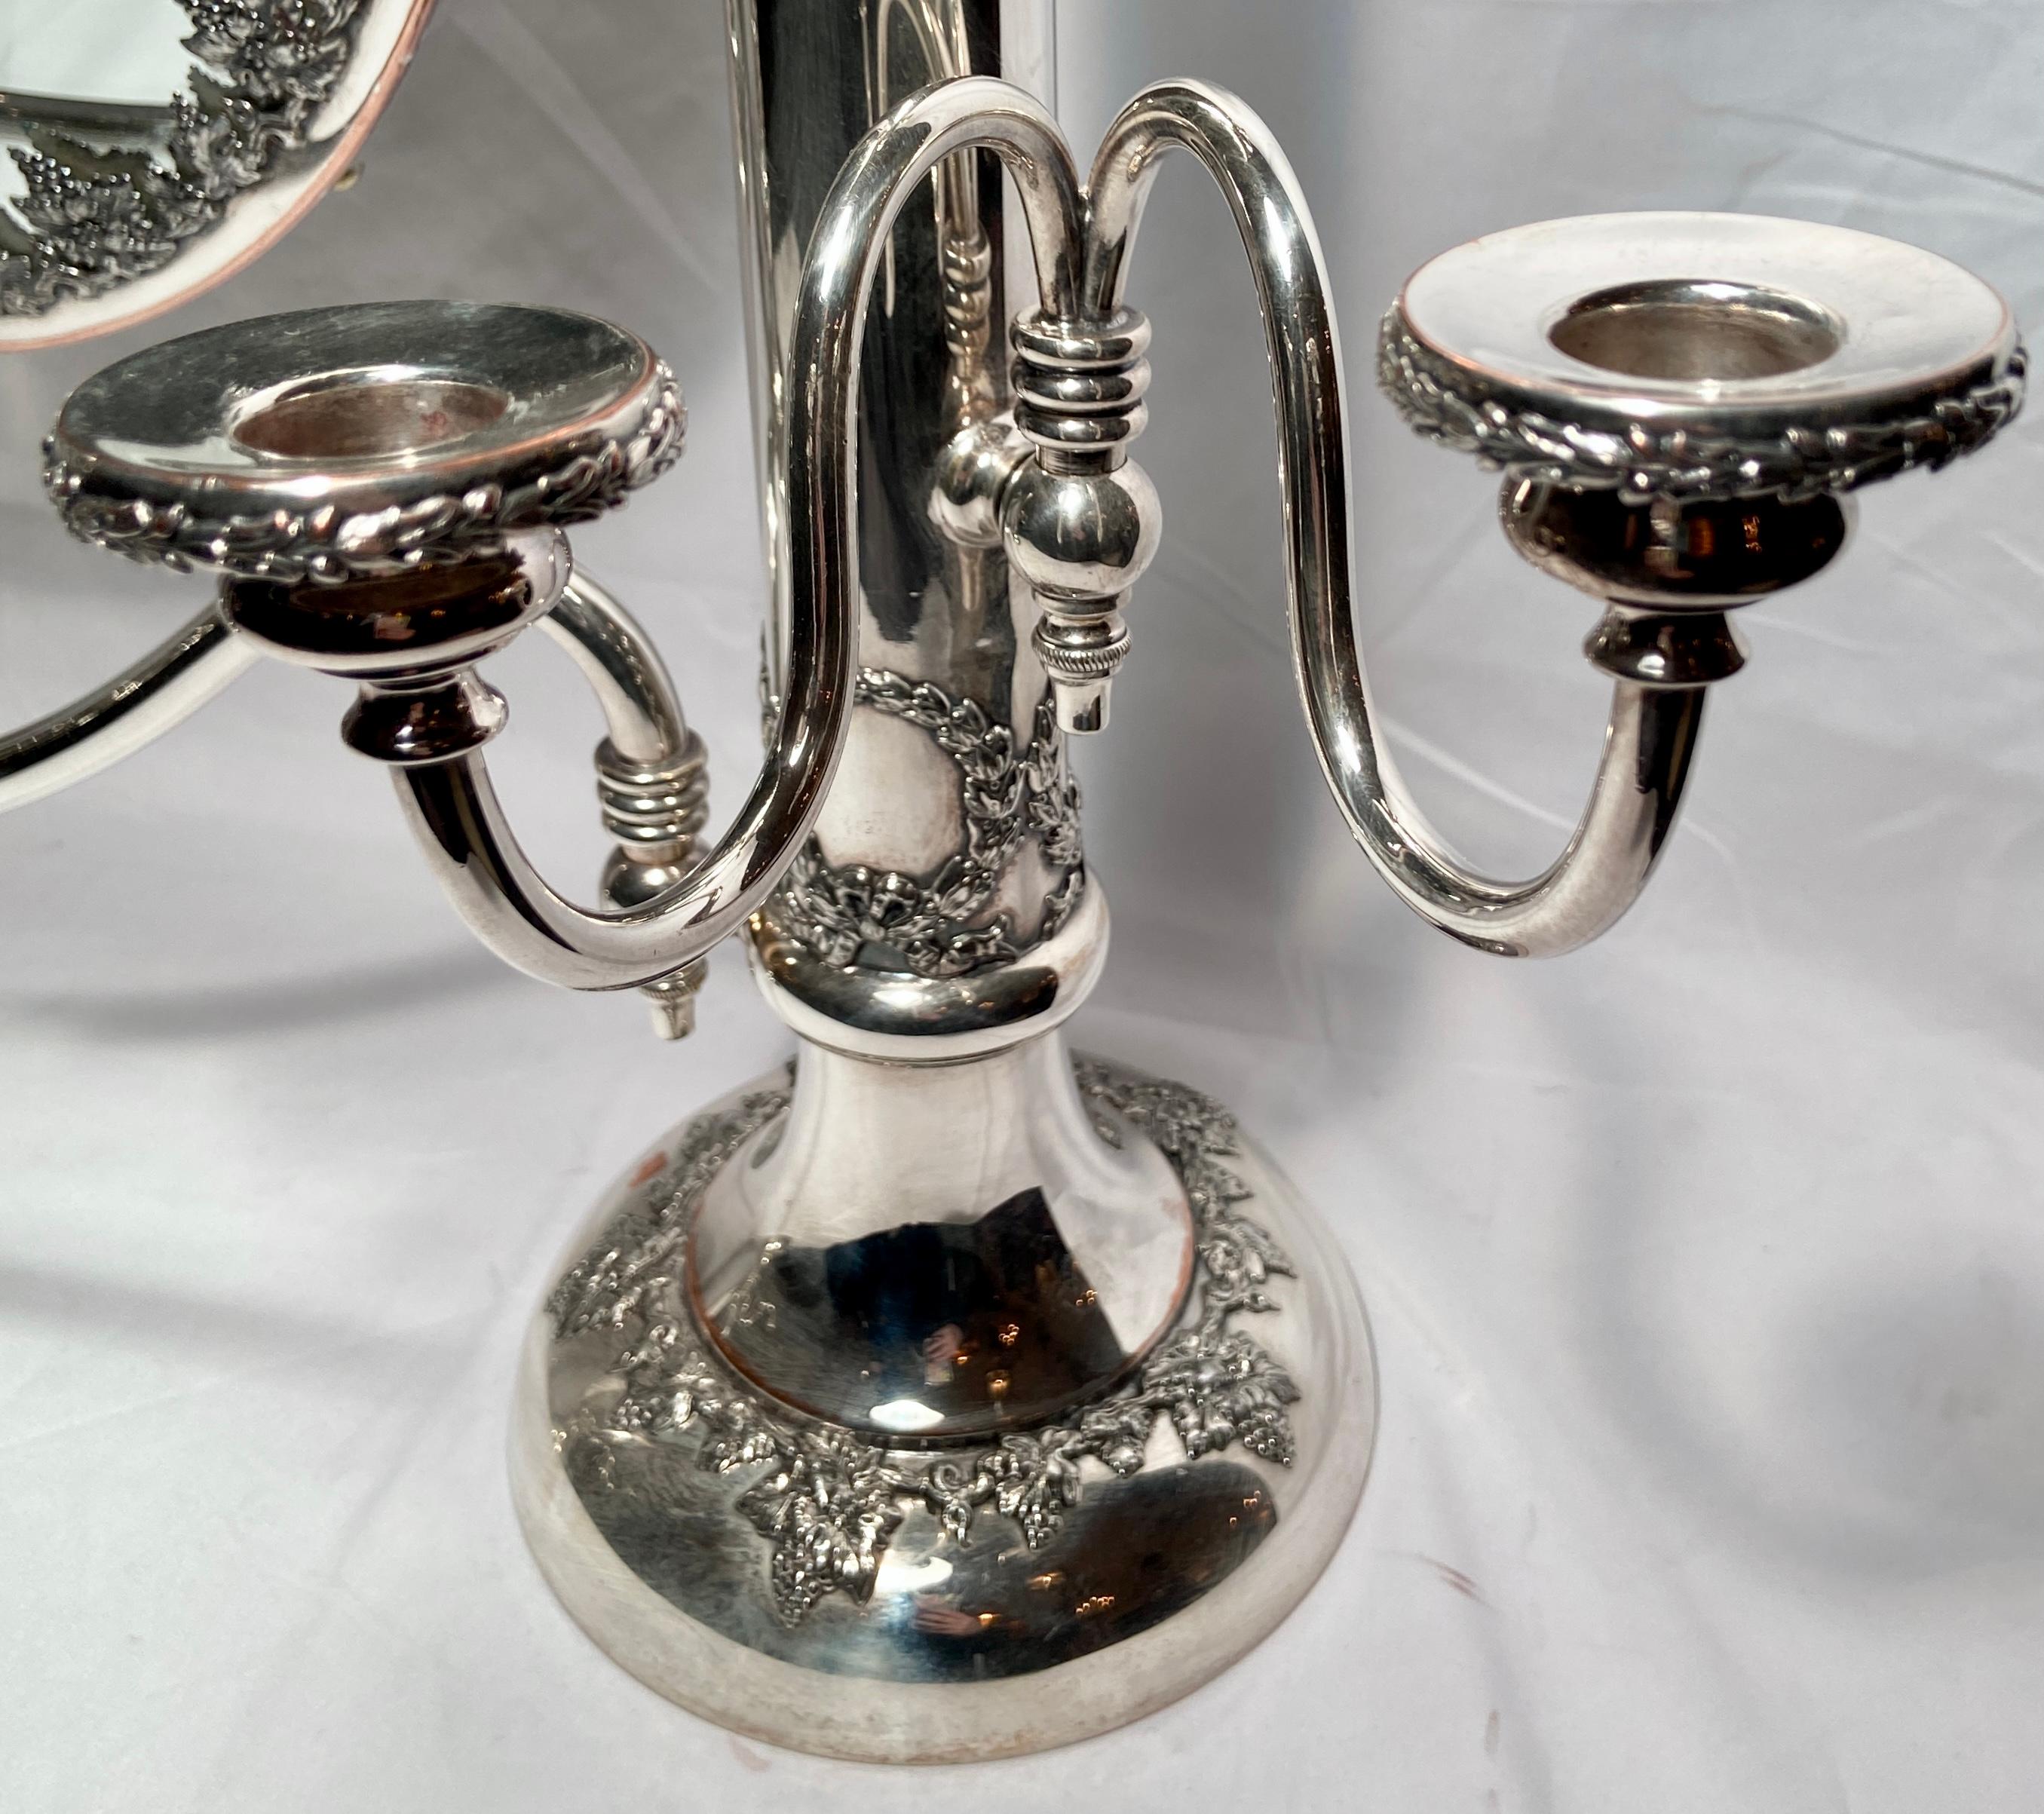 Antique American Silver-Plated Coiffeuse Mirror and Candelabra, Circa 1920-1930 In Good Condition For Sale In New Orleans, LA